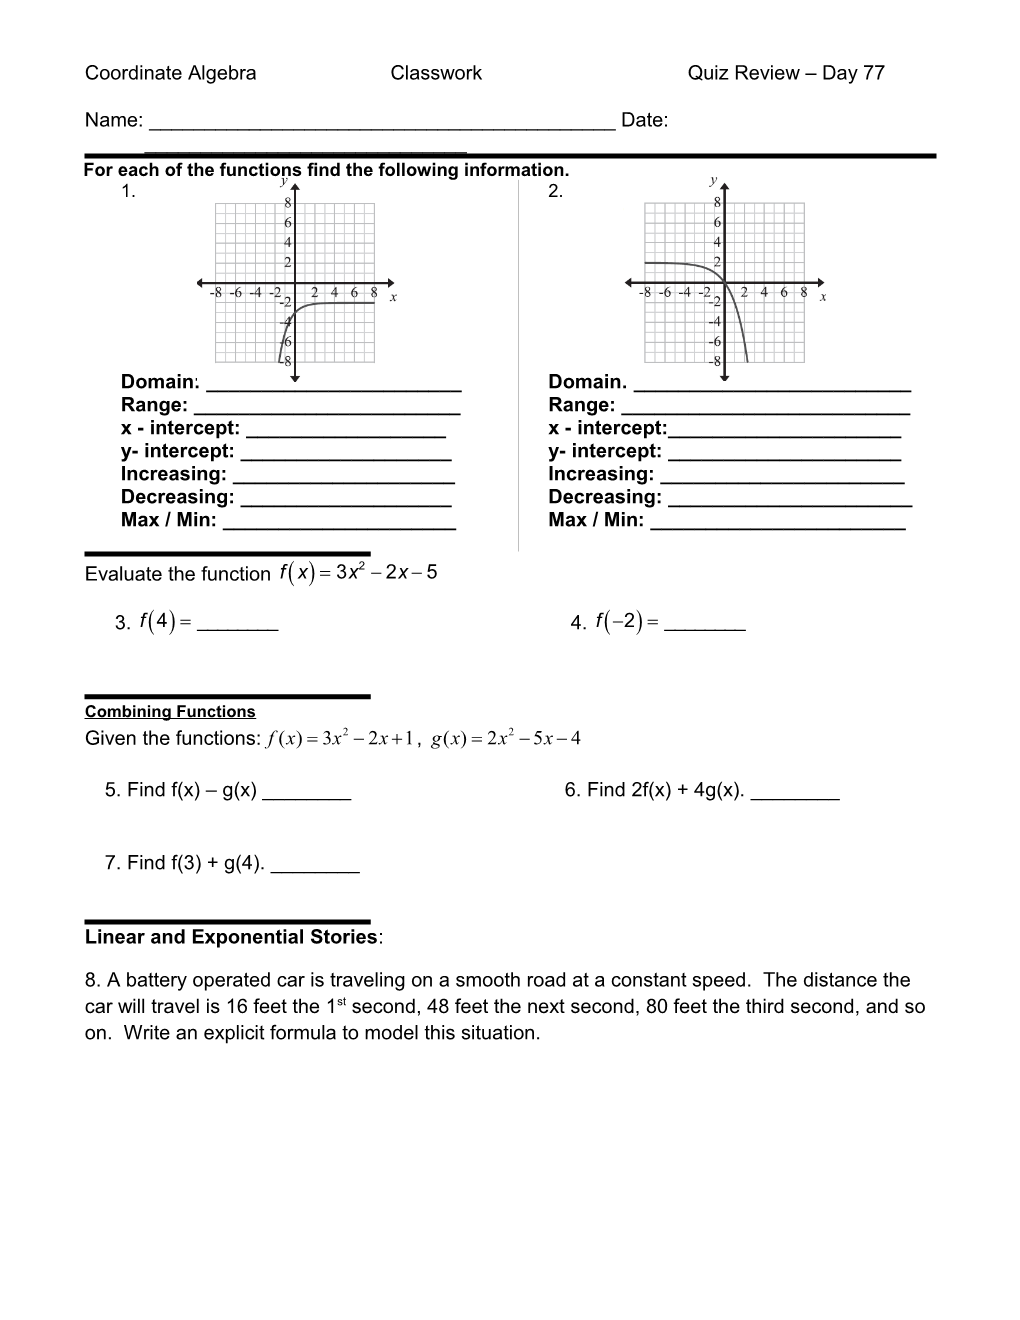 CC Coordinate Algebra Unit 3A Linear and Exponential Equations Test Review